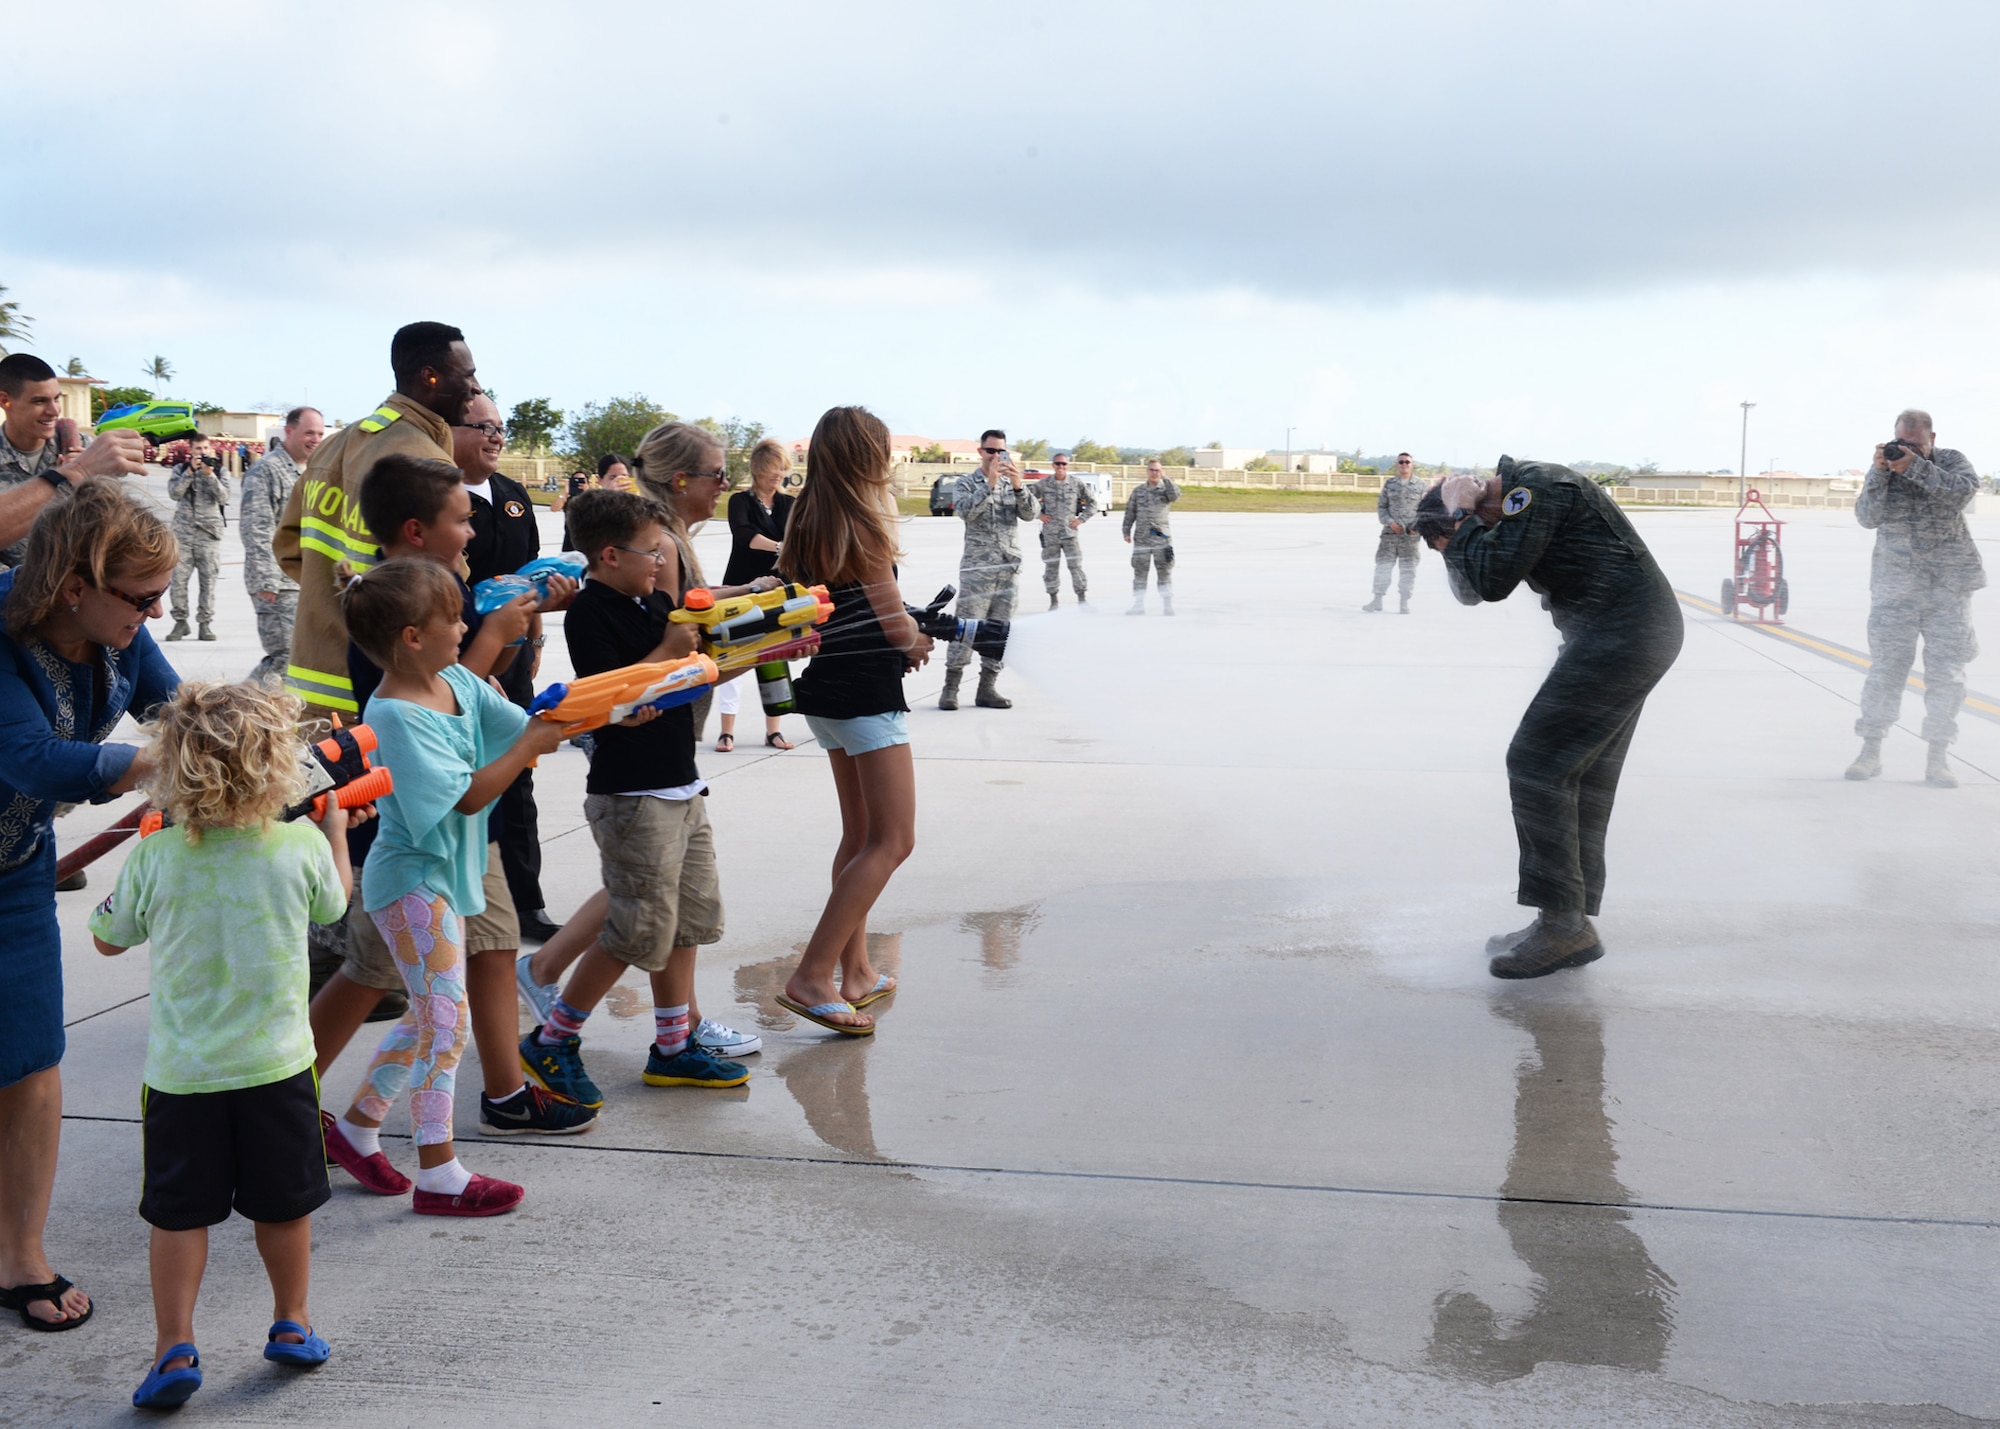 Brig. Gen. Andrew Toth, 36th Wing commander, is sprayed with water by friends and family after landing a B-52 Stratofortress during a fini-flight April 26, 2016, at Andersen Air Force Base, Guam. The fini-flight, which is a tradition carried throughout the Air Force, marks Toth’s final flight on Guam. (U.S. Air Force photo by Senior Airman Cierra Presentado)